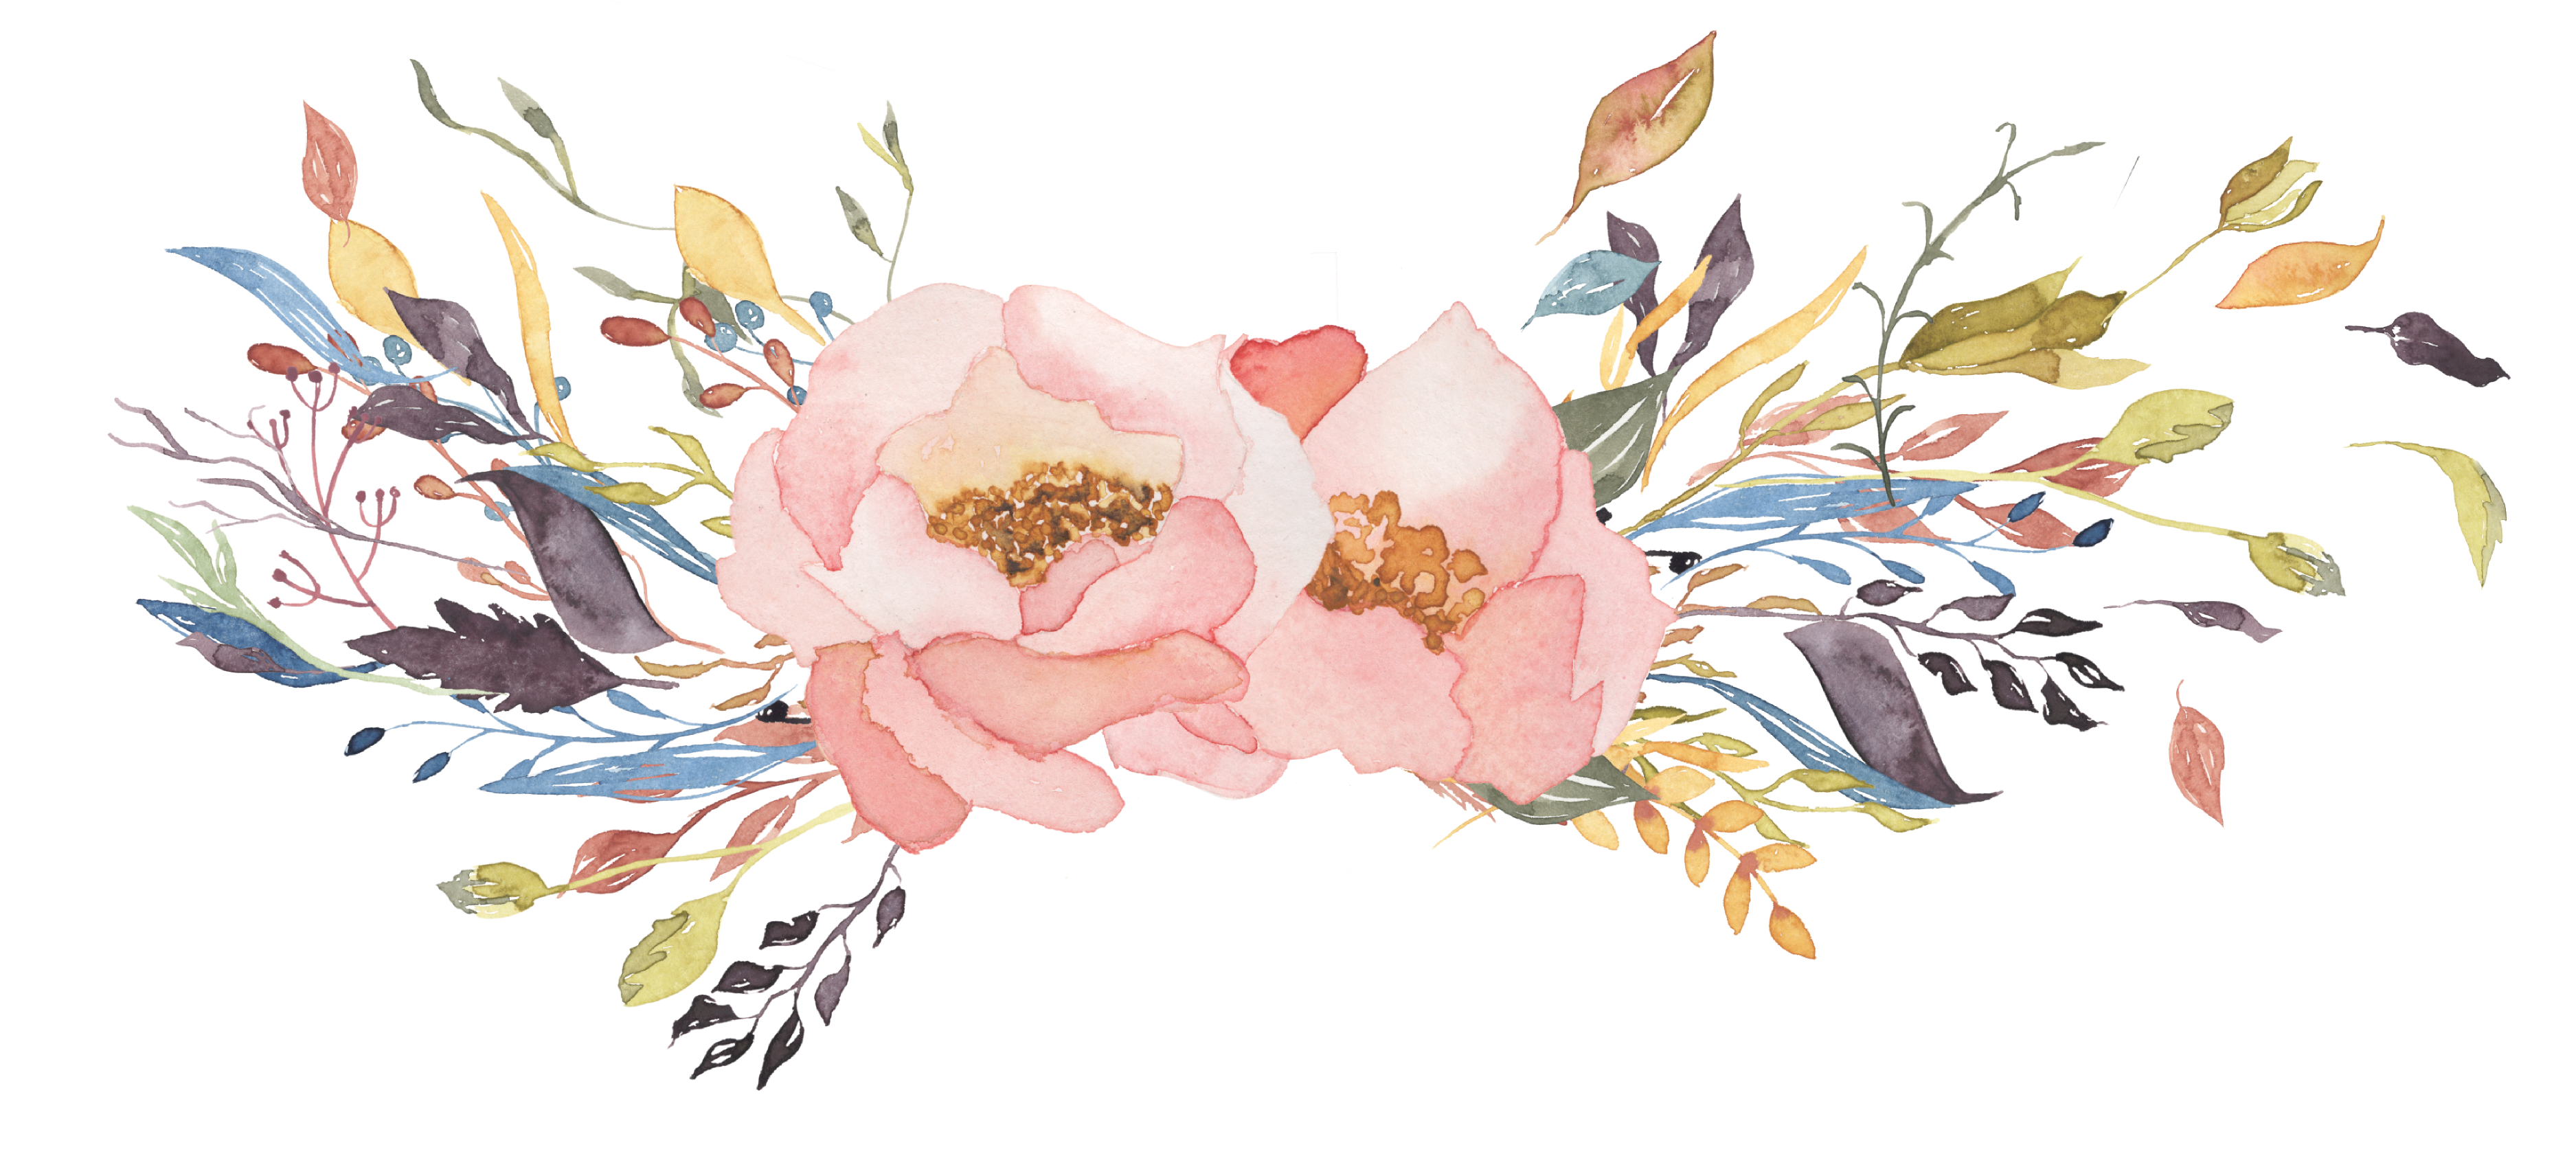 Watercolor Flowers Image PNG Transparent Background, Free Download #46968 -  FreeIconsPNG